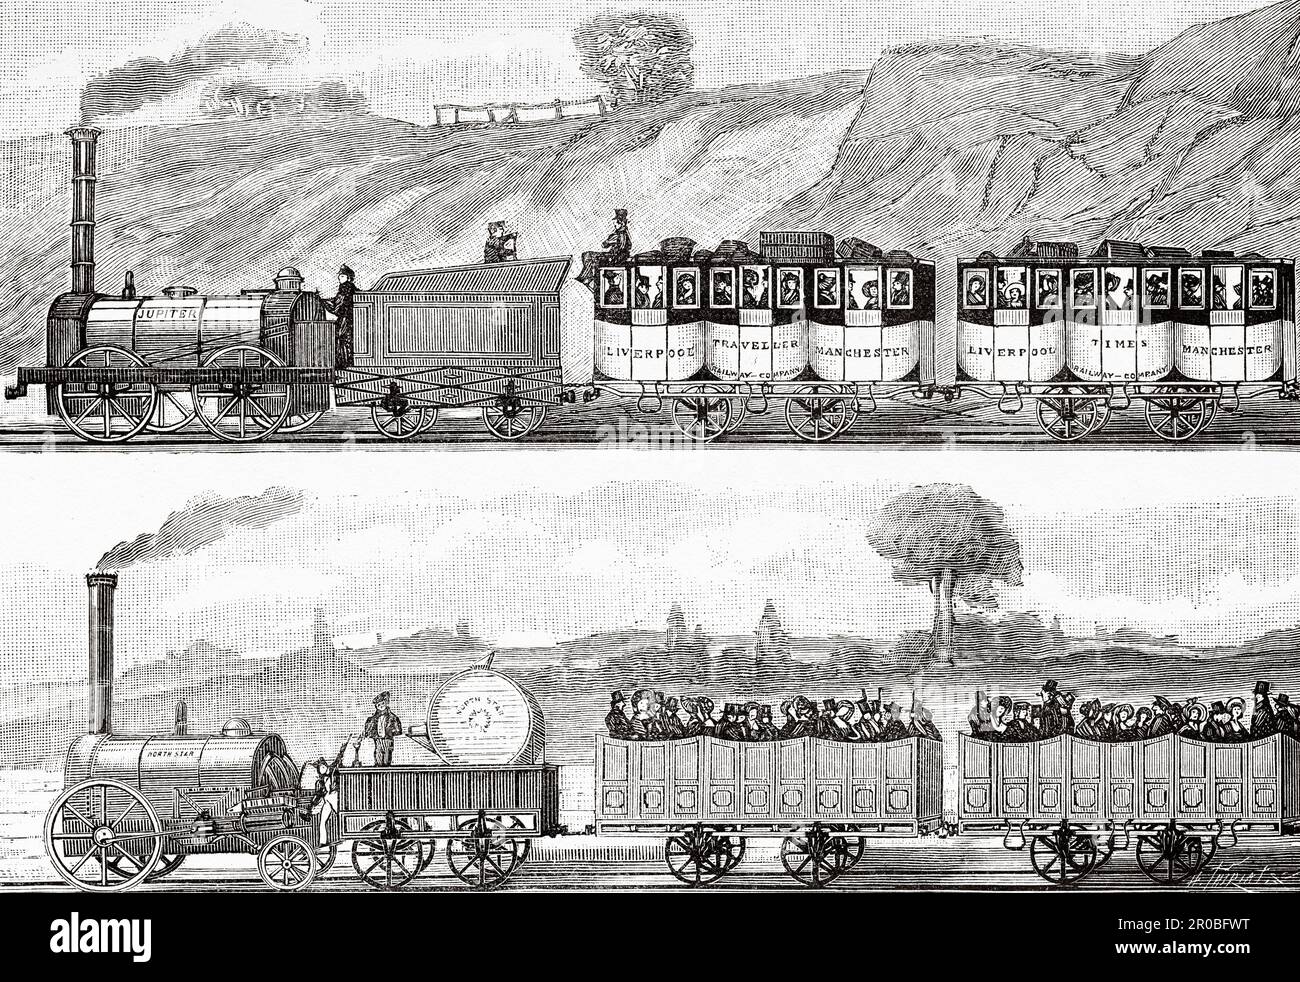 Steam locomotives between Liverpool and Manchester in 1831, England. Old 19th century engraving from La Nature 1887 Stock Photo